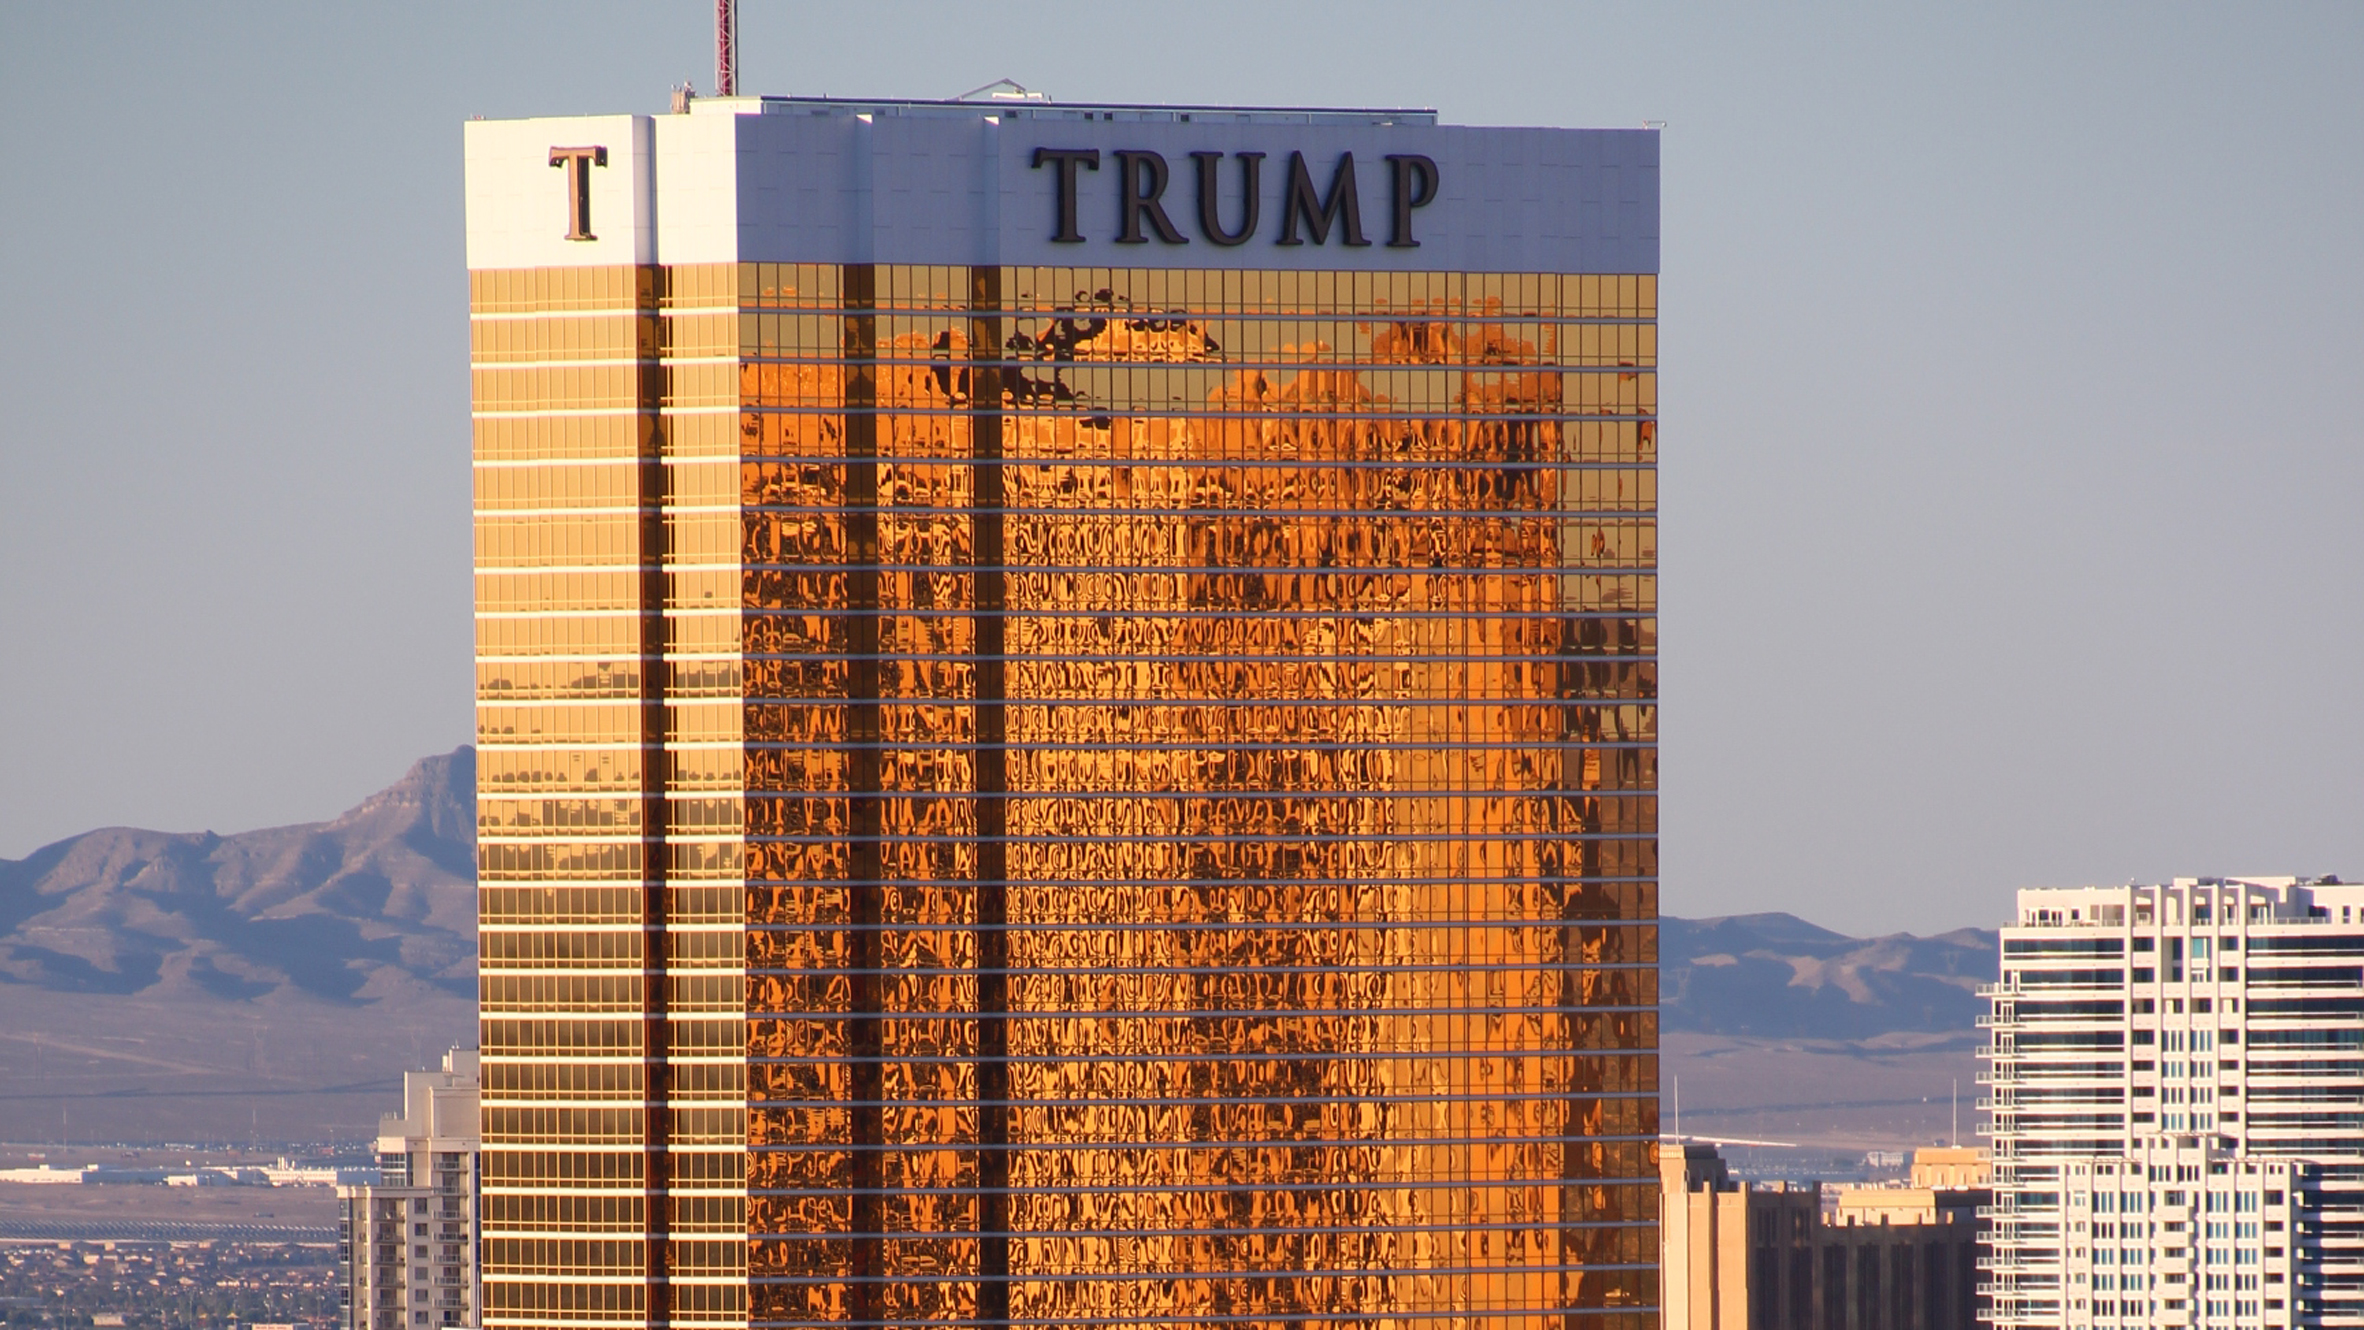 donald-trump-towers-architecture-trumpitecture-skyscapers-us-election-2016-opinion-doug-staker_dezeen_hero2